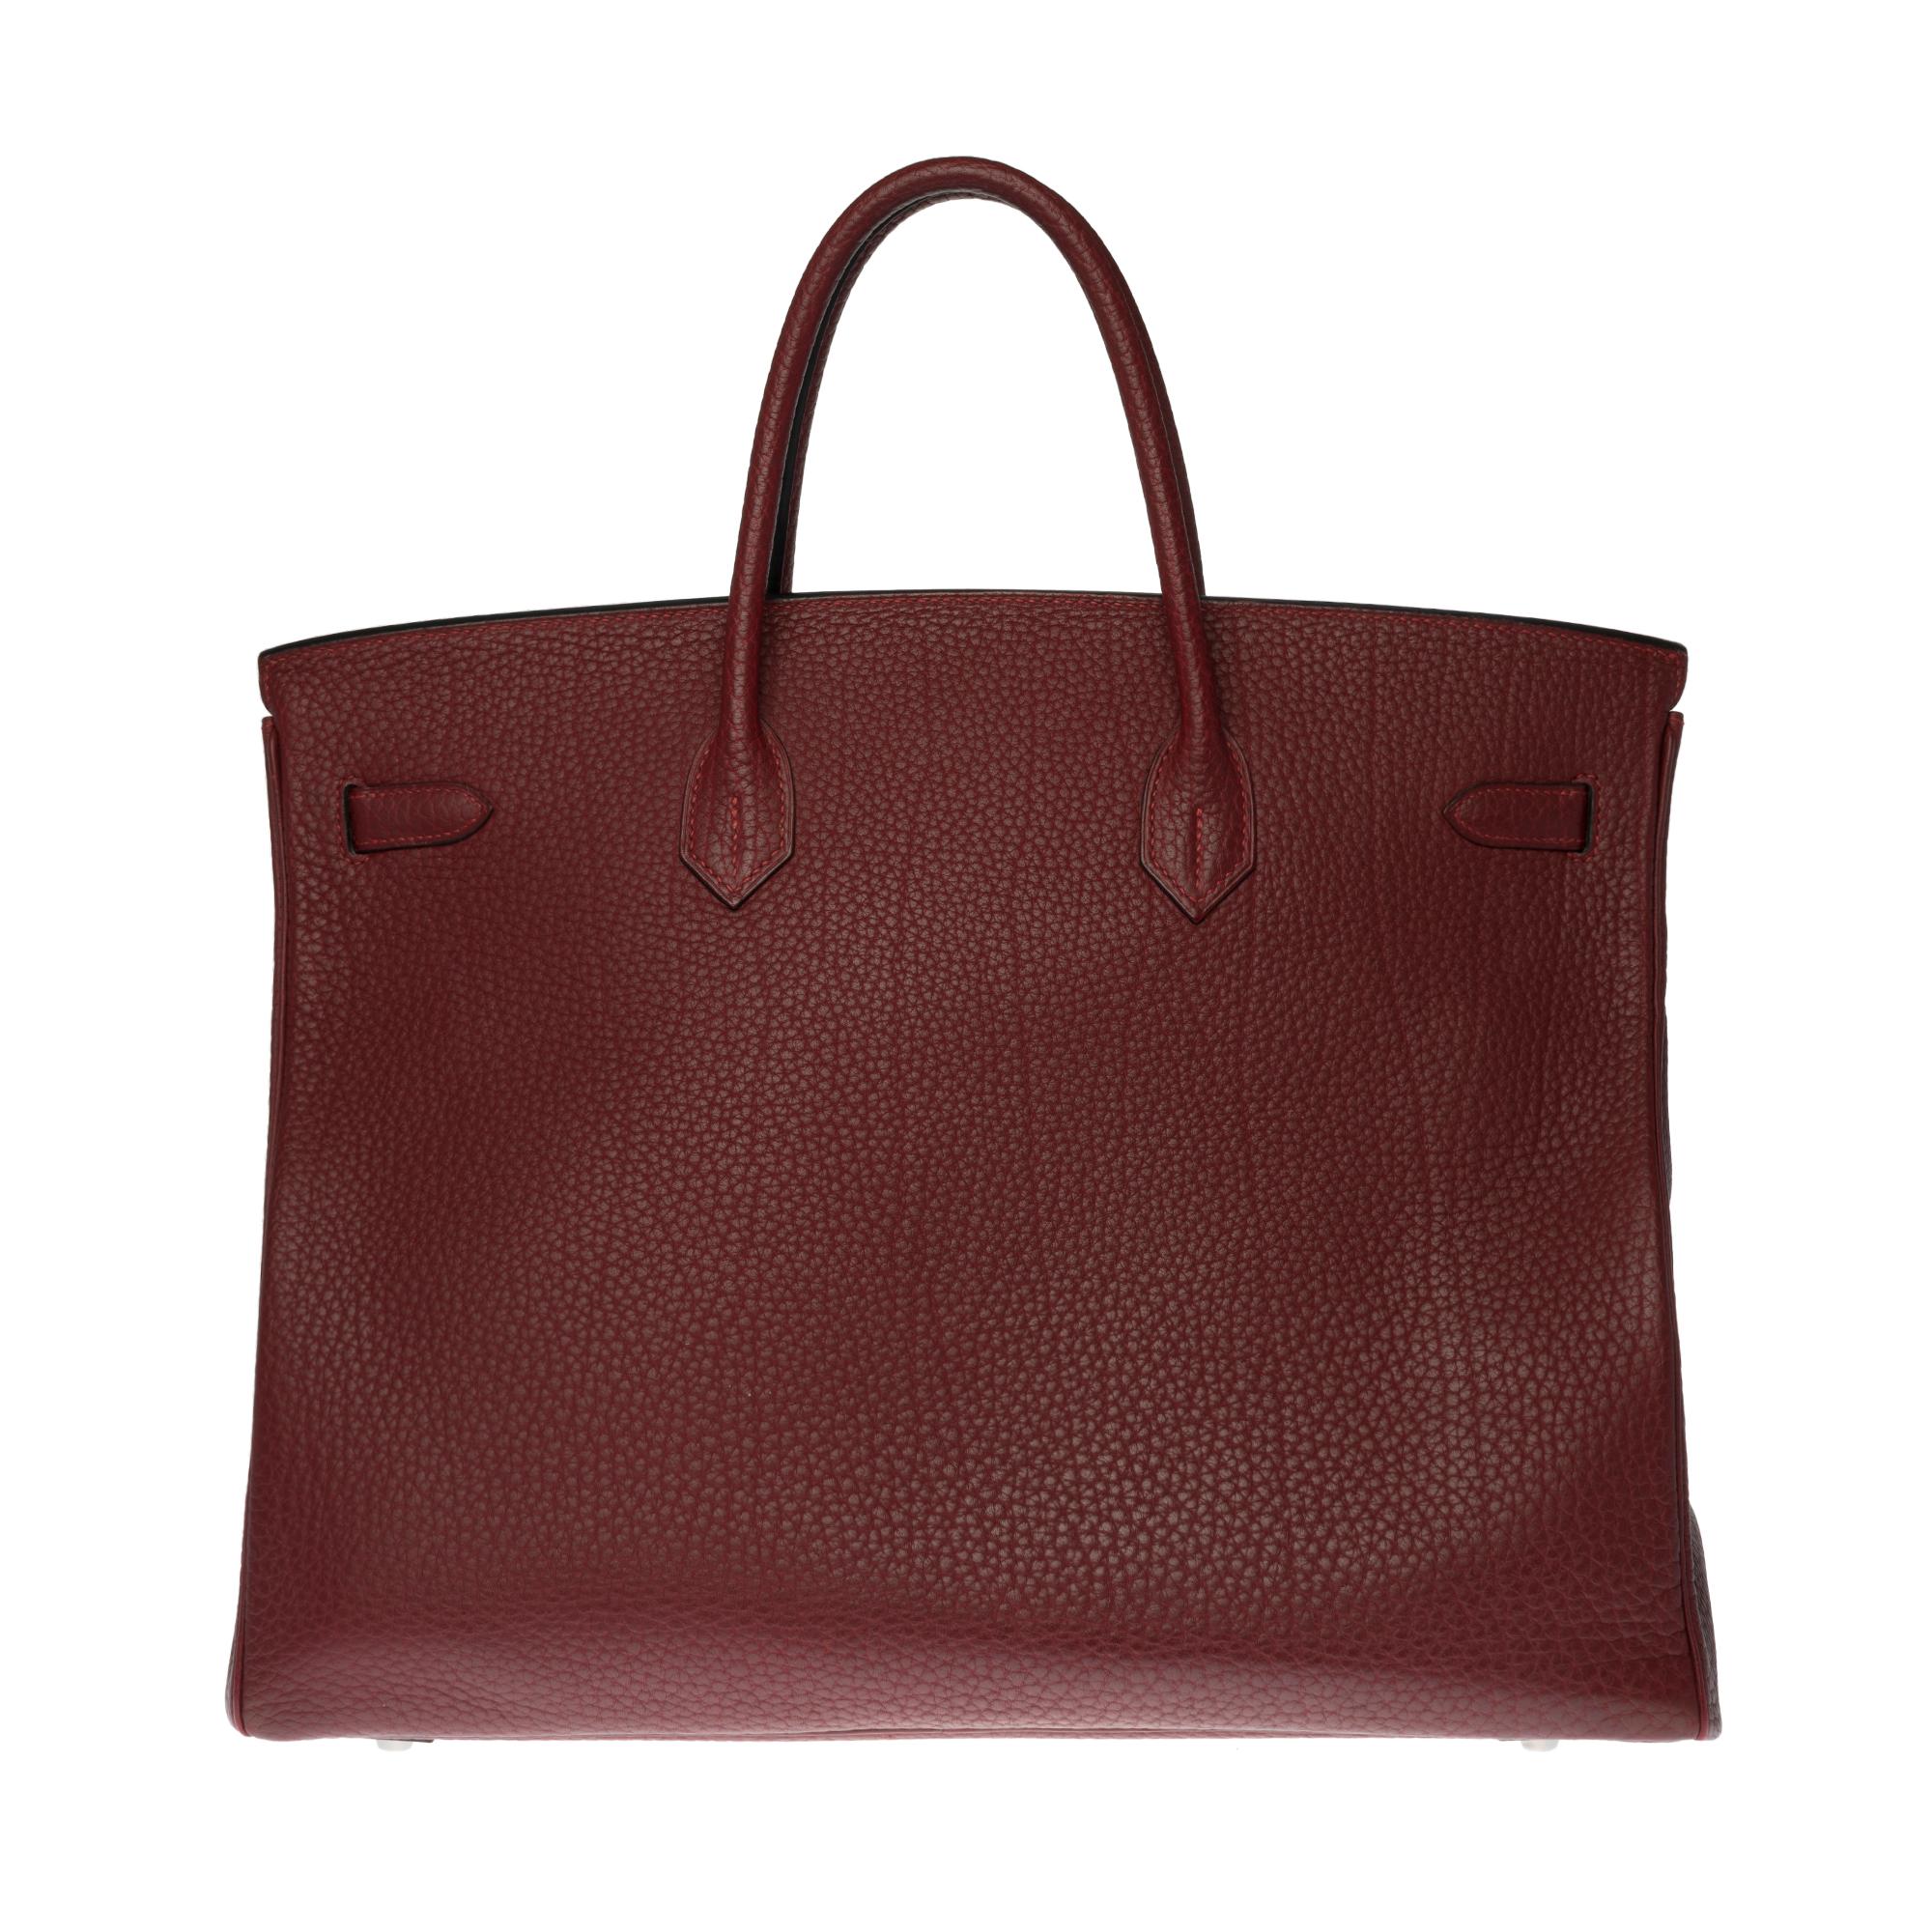 Spacious Hermes Birkin 40 cm handbag in burgundy Fjord leather, silver plated palladium plated metal hardware, double handle in burgundy leather allowing a handheld.
Closure by flap.
Lining in burgundy leather, a zipped pocket, a patch